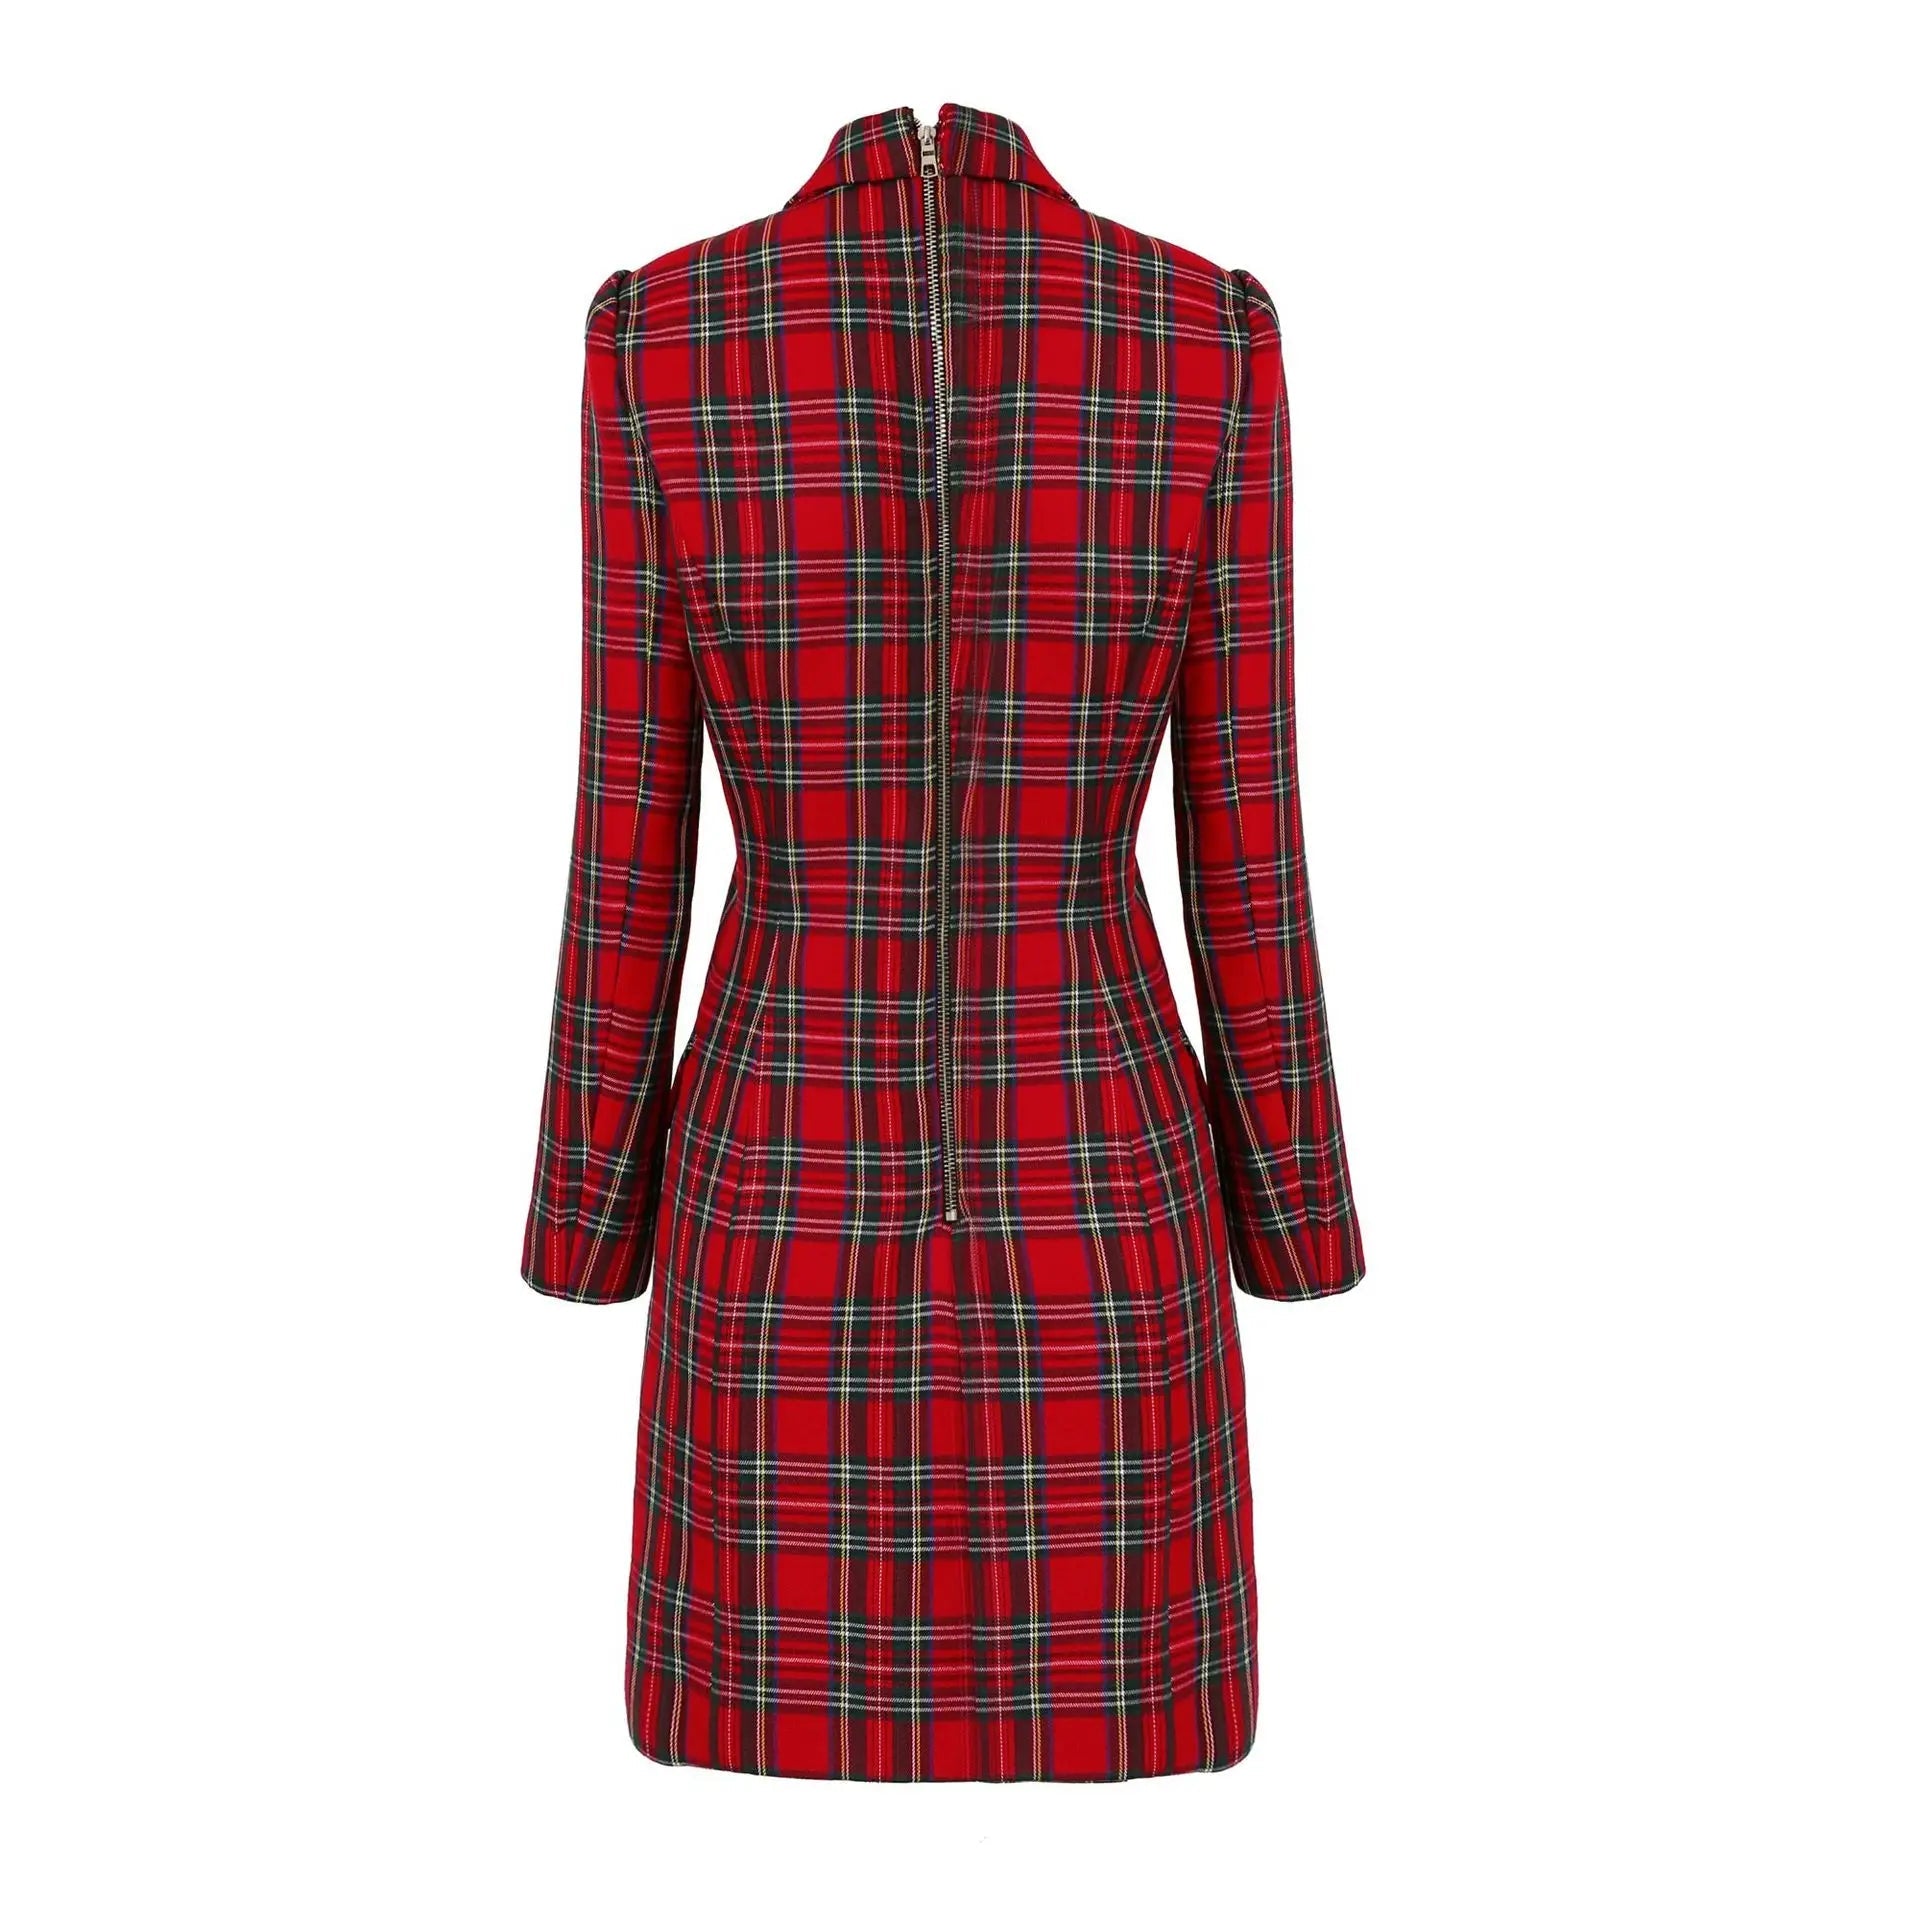 Red Plaid Blazer Dress For Women - Veronica Luxe